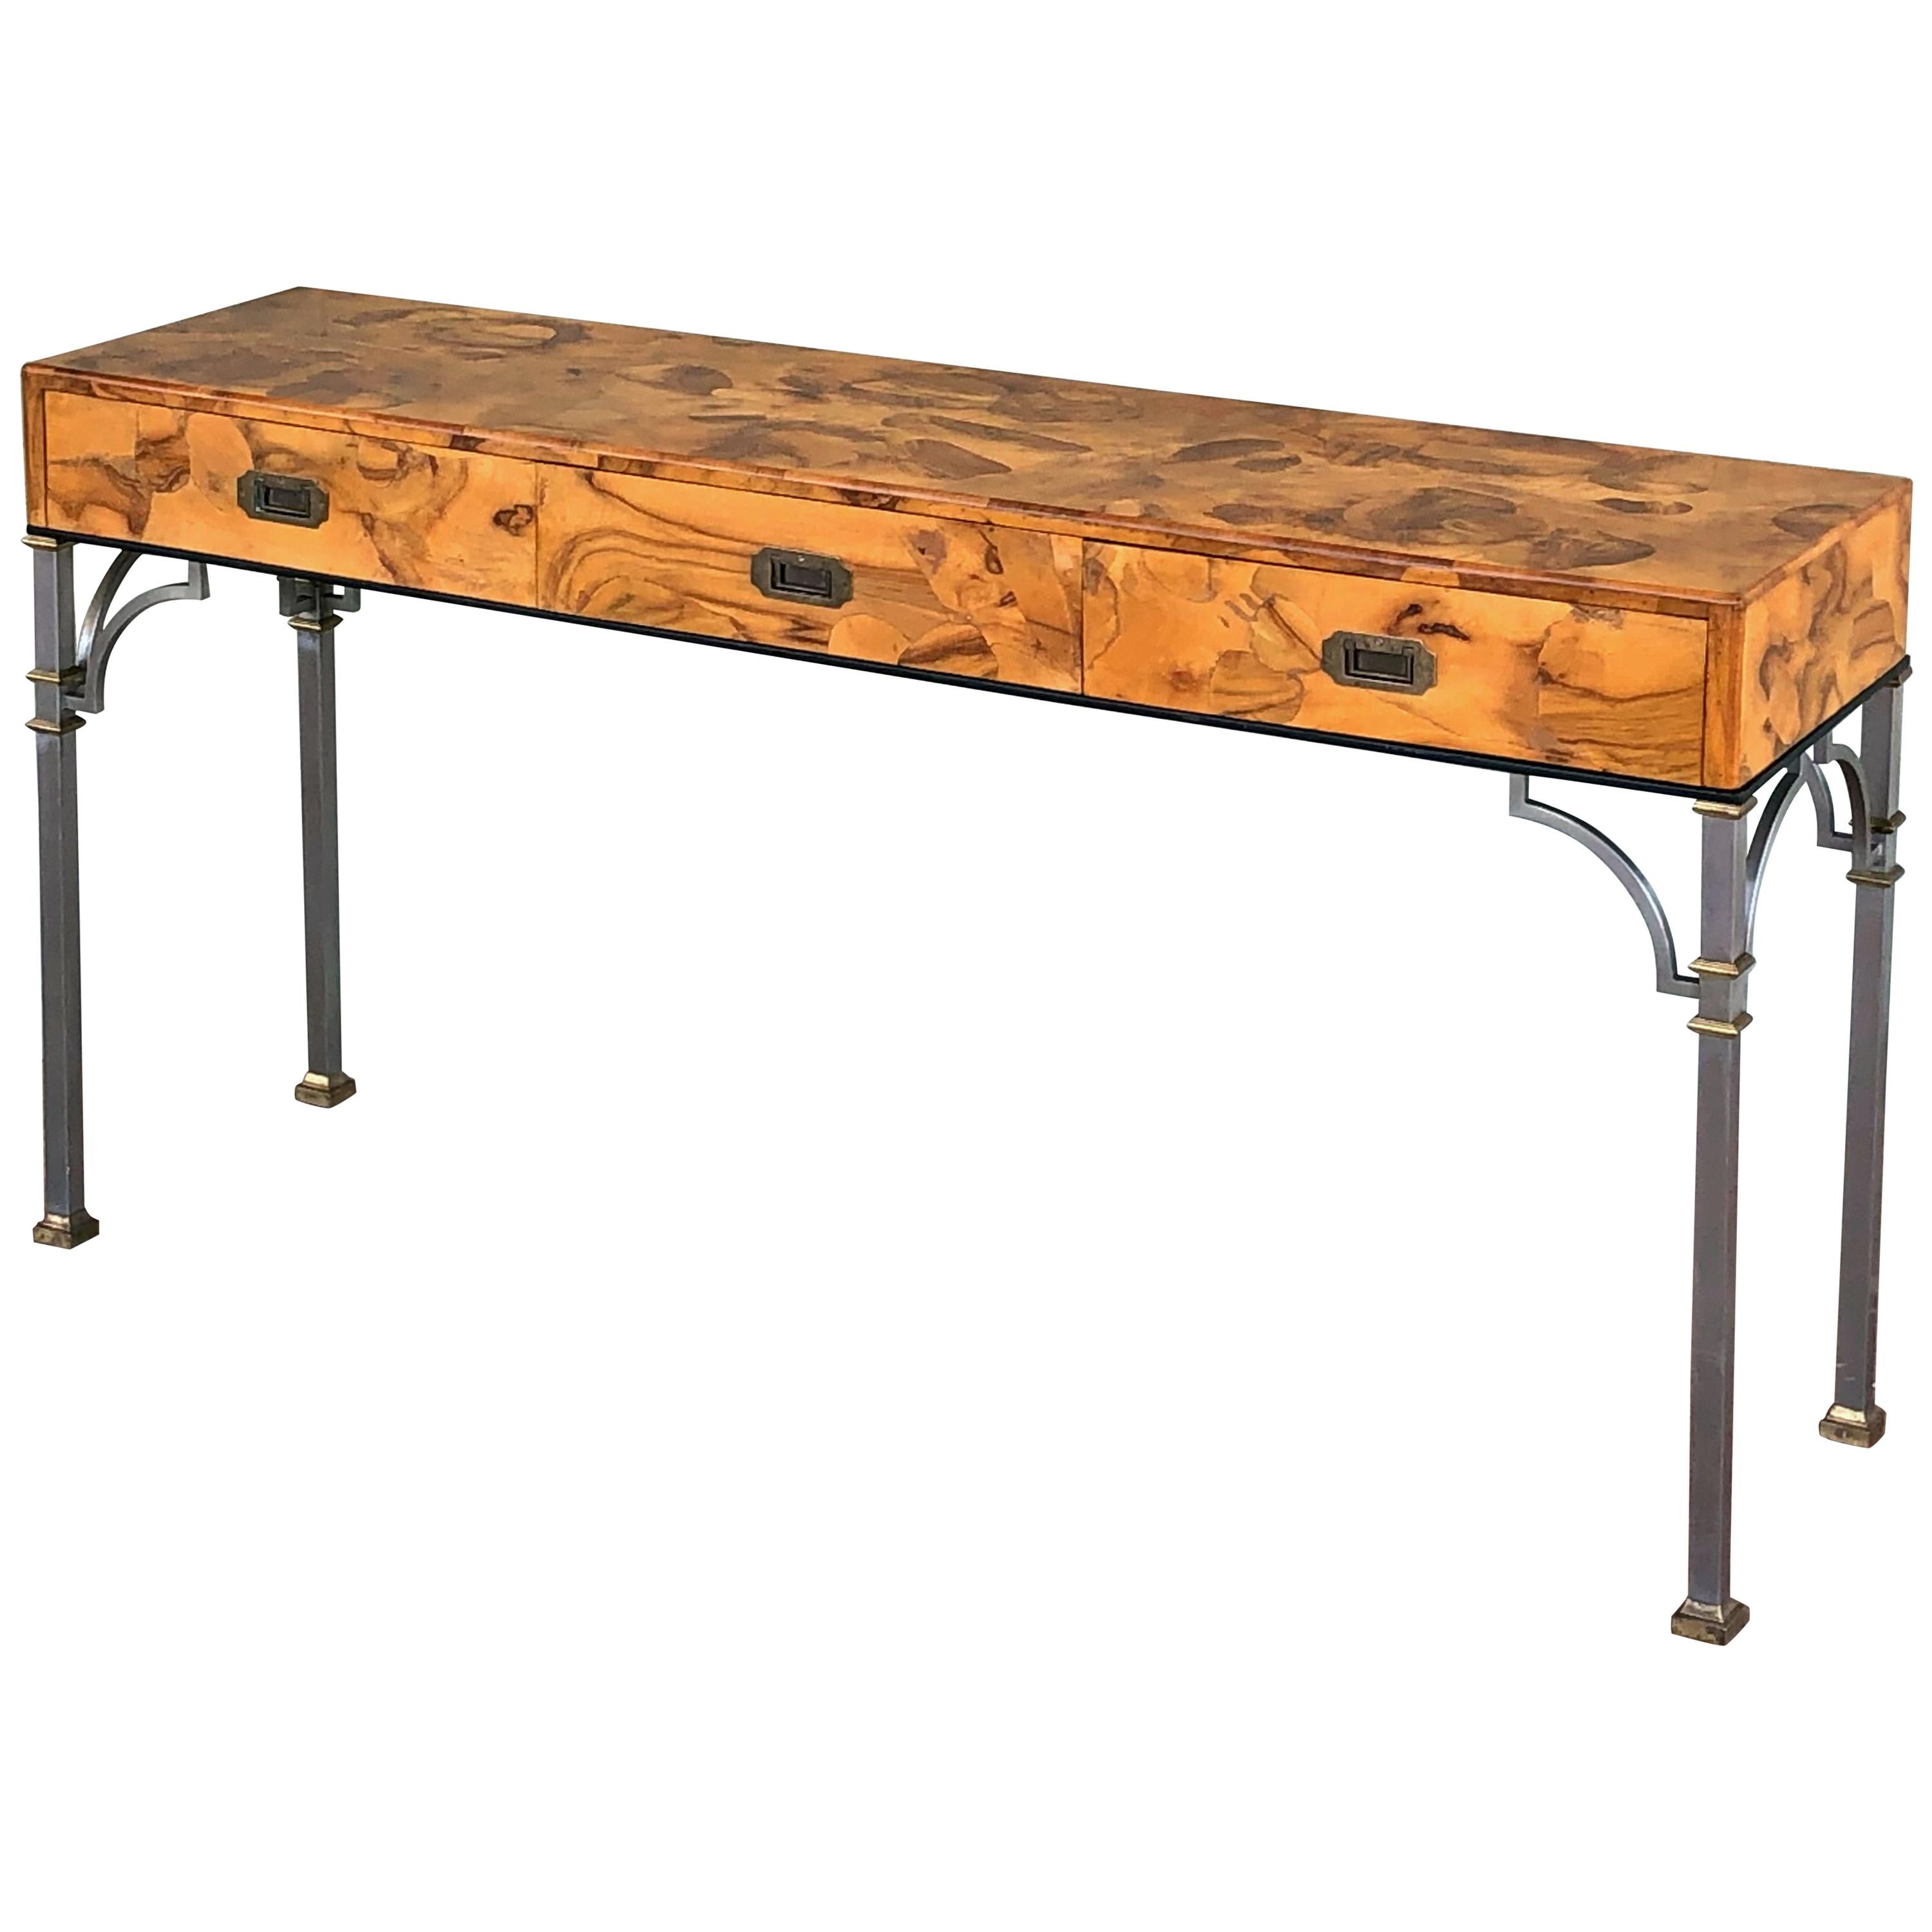 English Three-Drawer Console Table of Olive Wood on Metal Legs